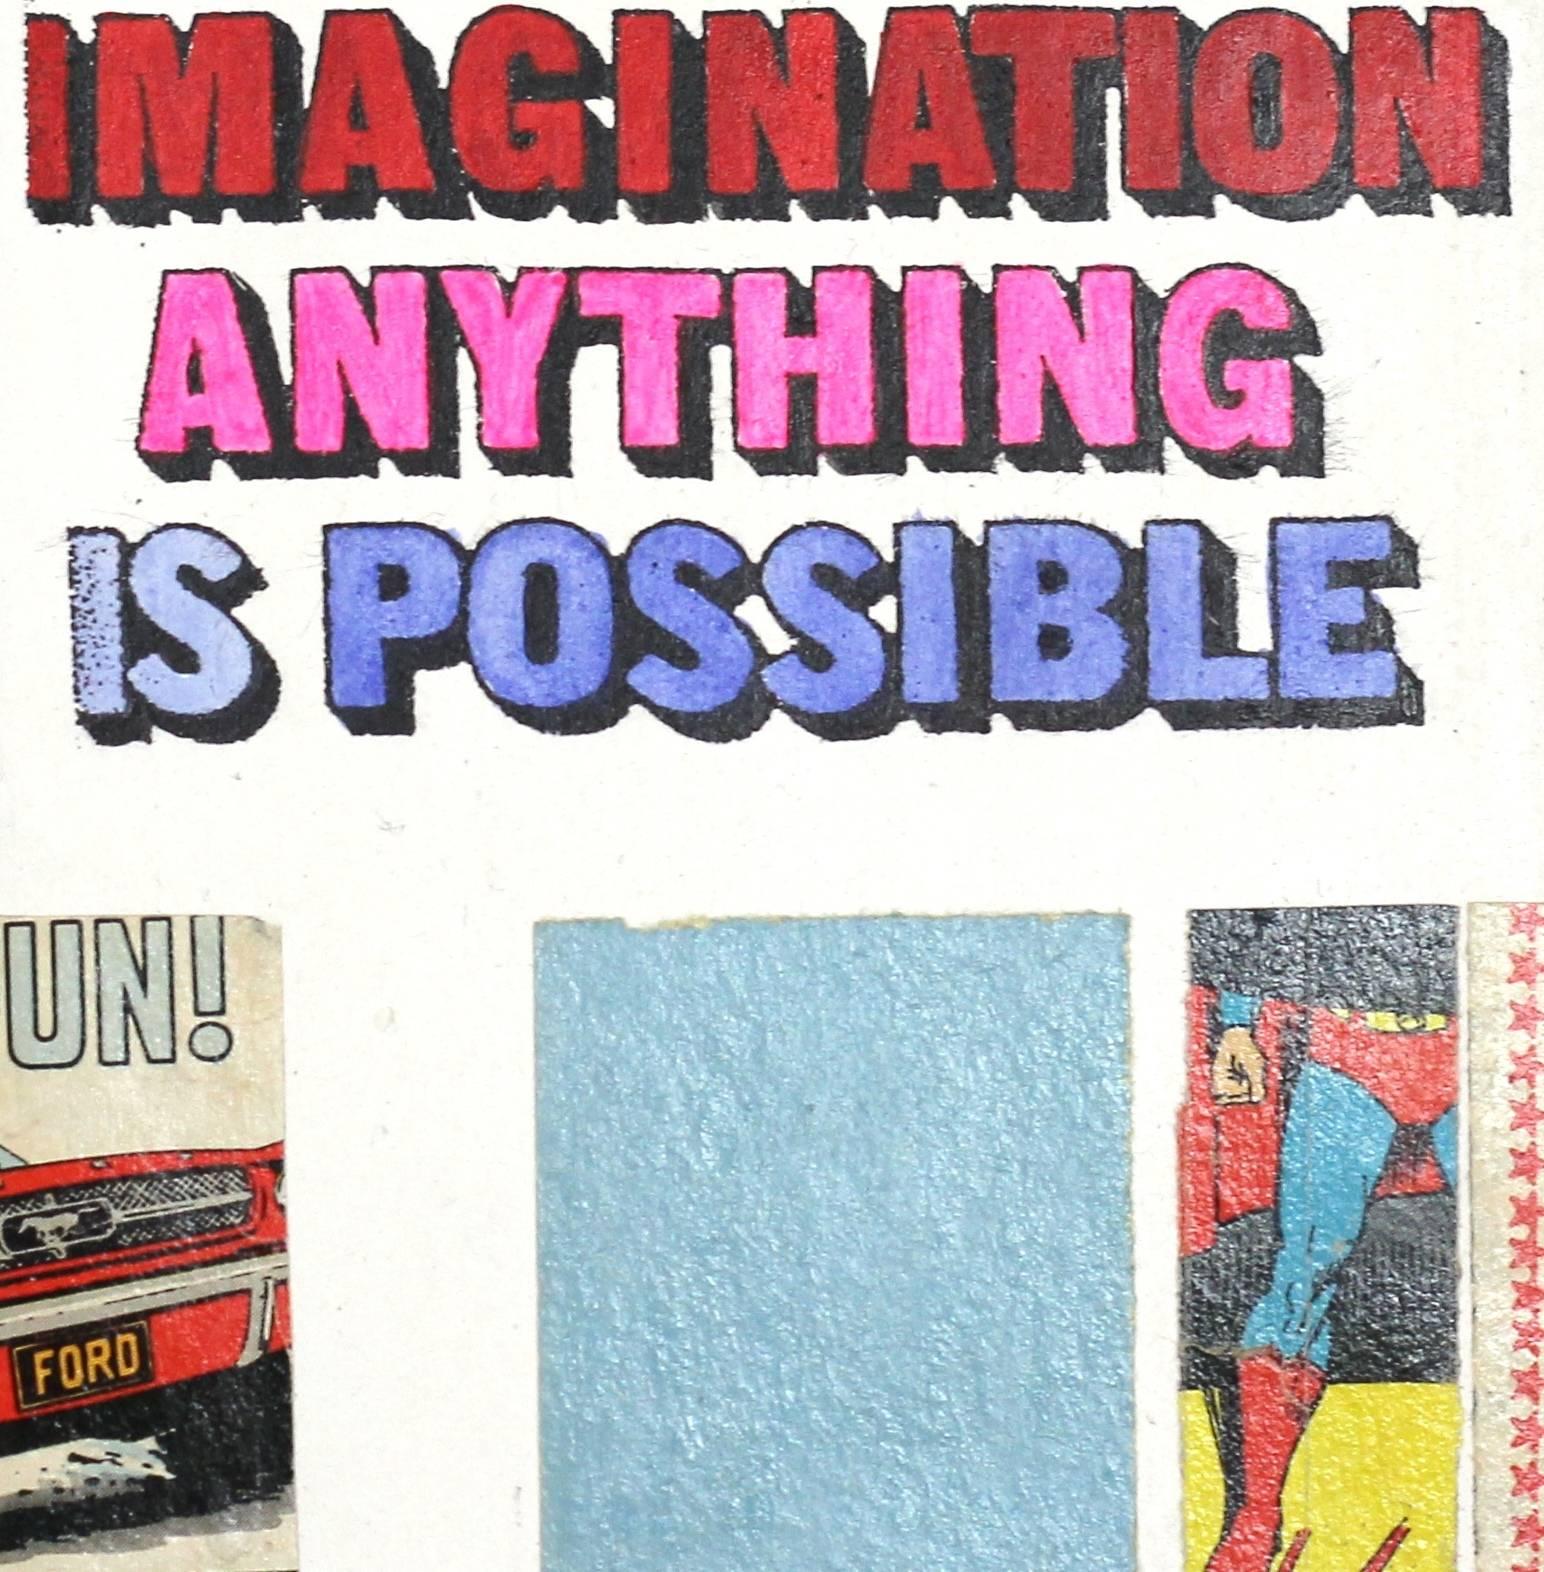 With a Little Imagination Anything is Possible - Pop Art Painting by Kati Elm